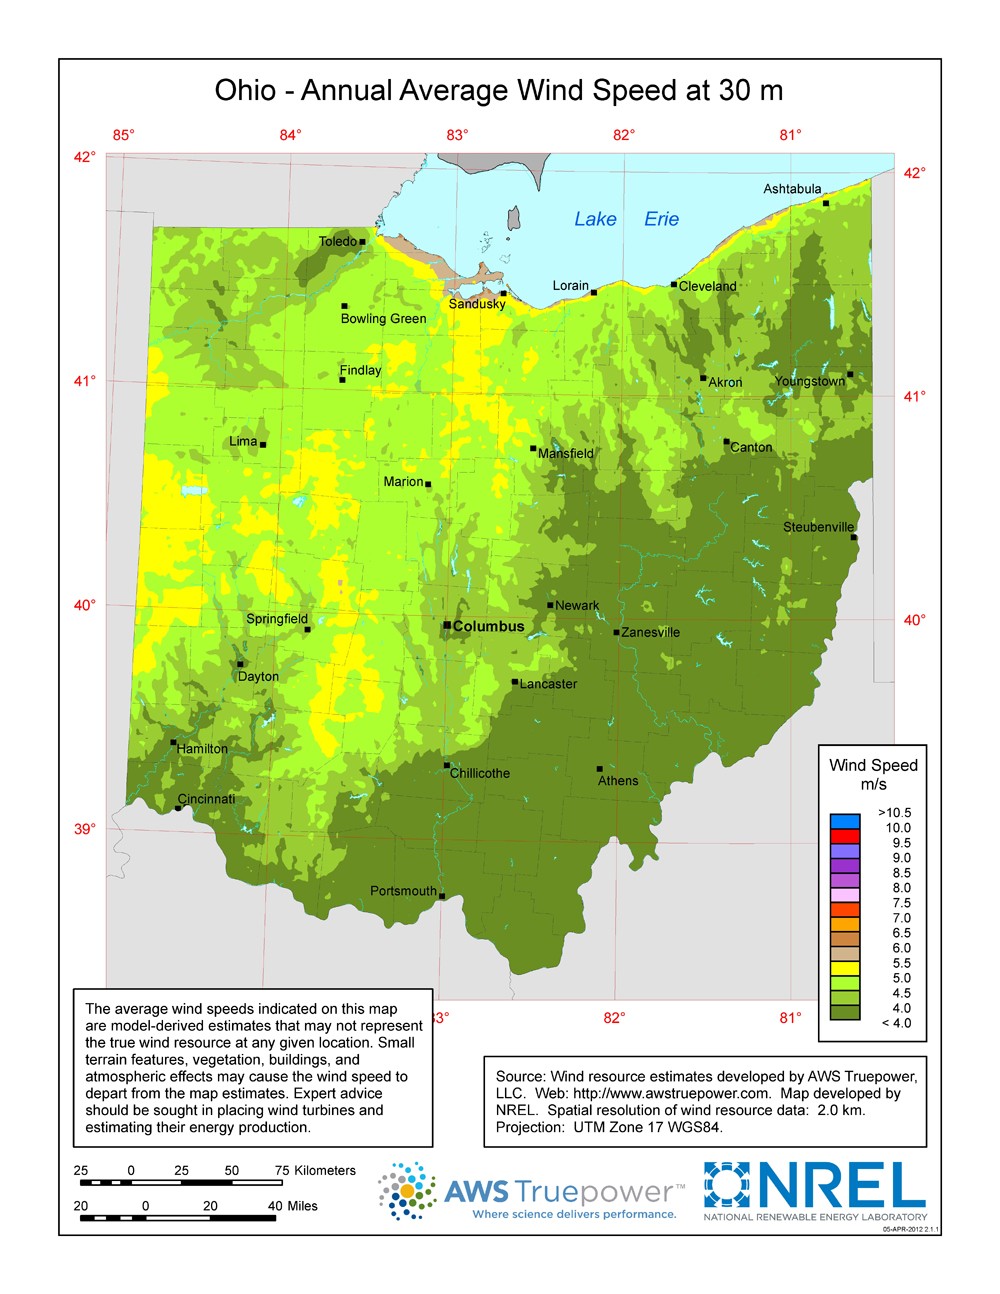 A map of Ohio showing wind speeds at a 30-m height.